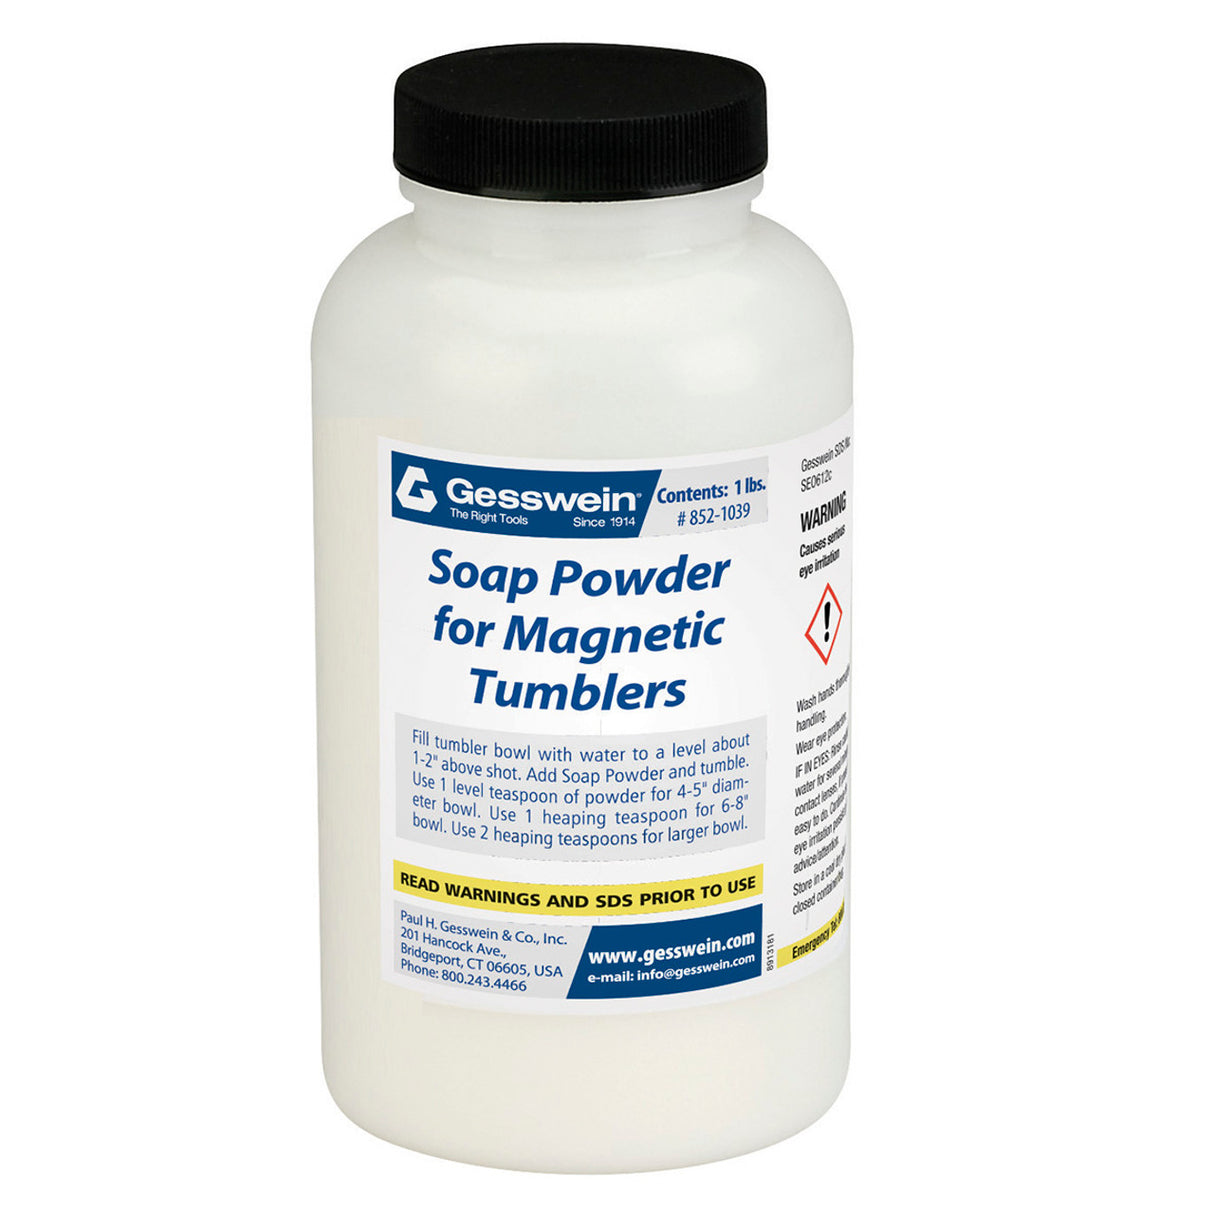 Soap Powder for Magnetic Tumblers